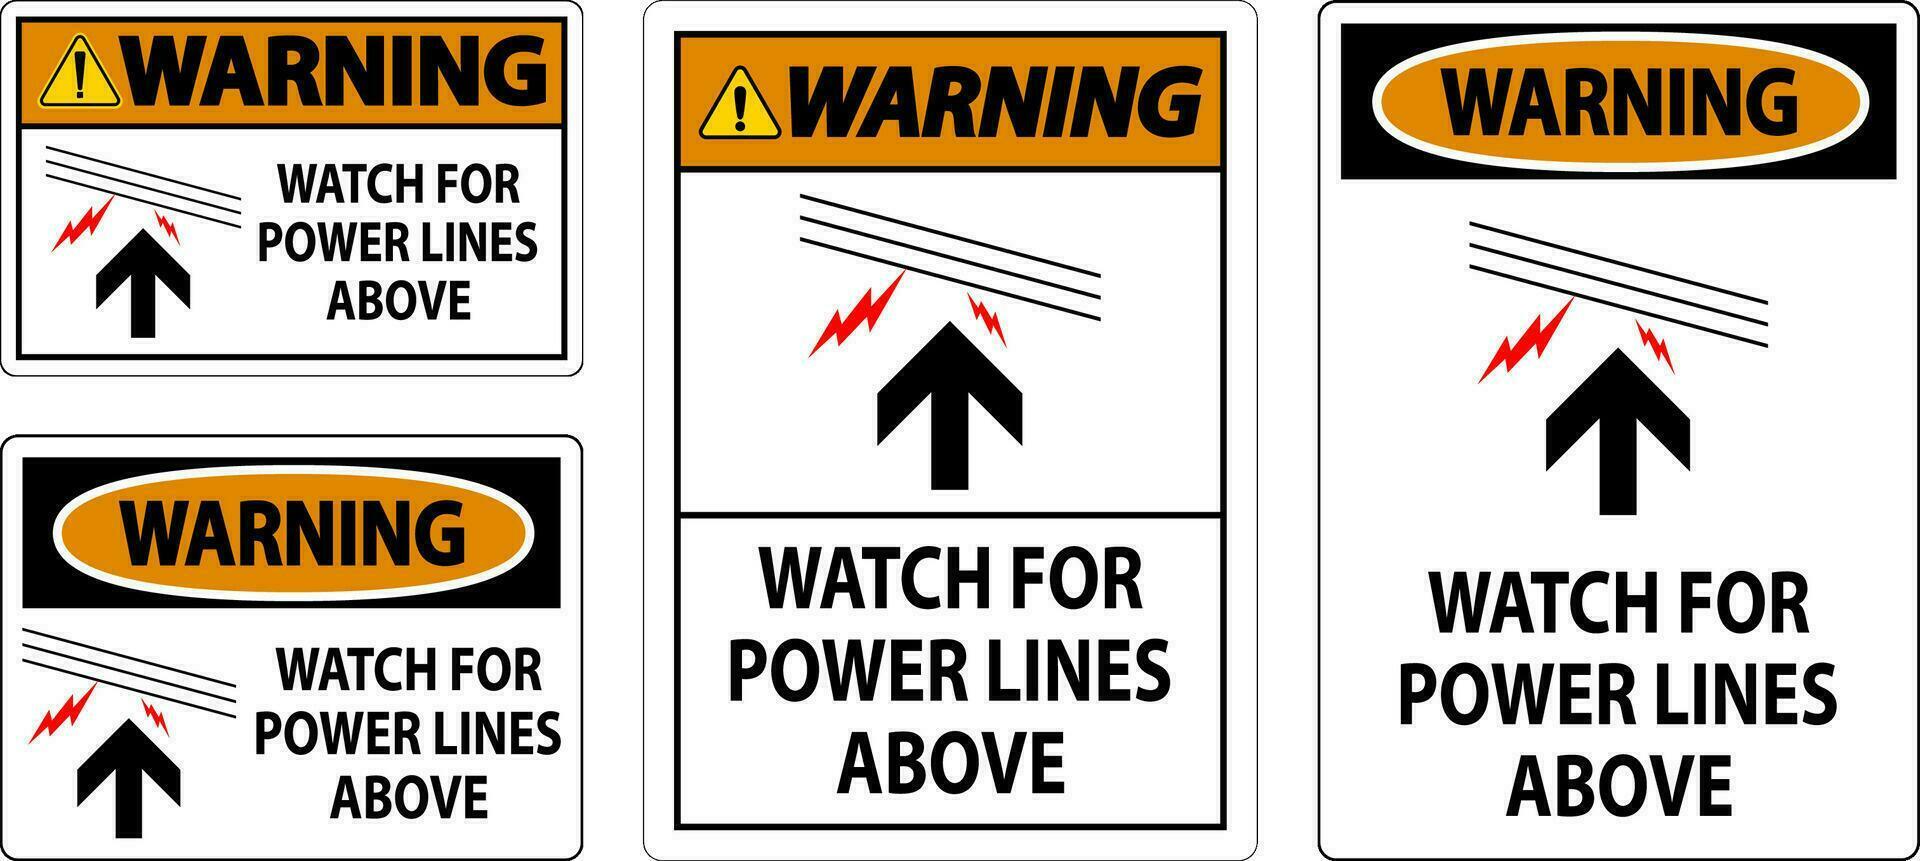 Warning Sign Watch For Power Lines Above vector